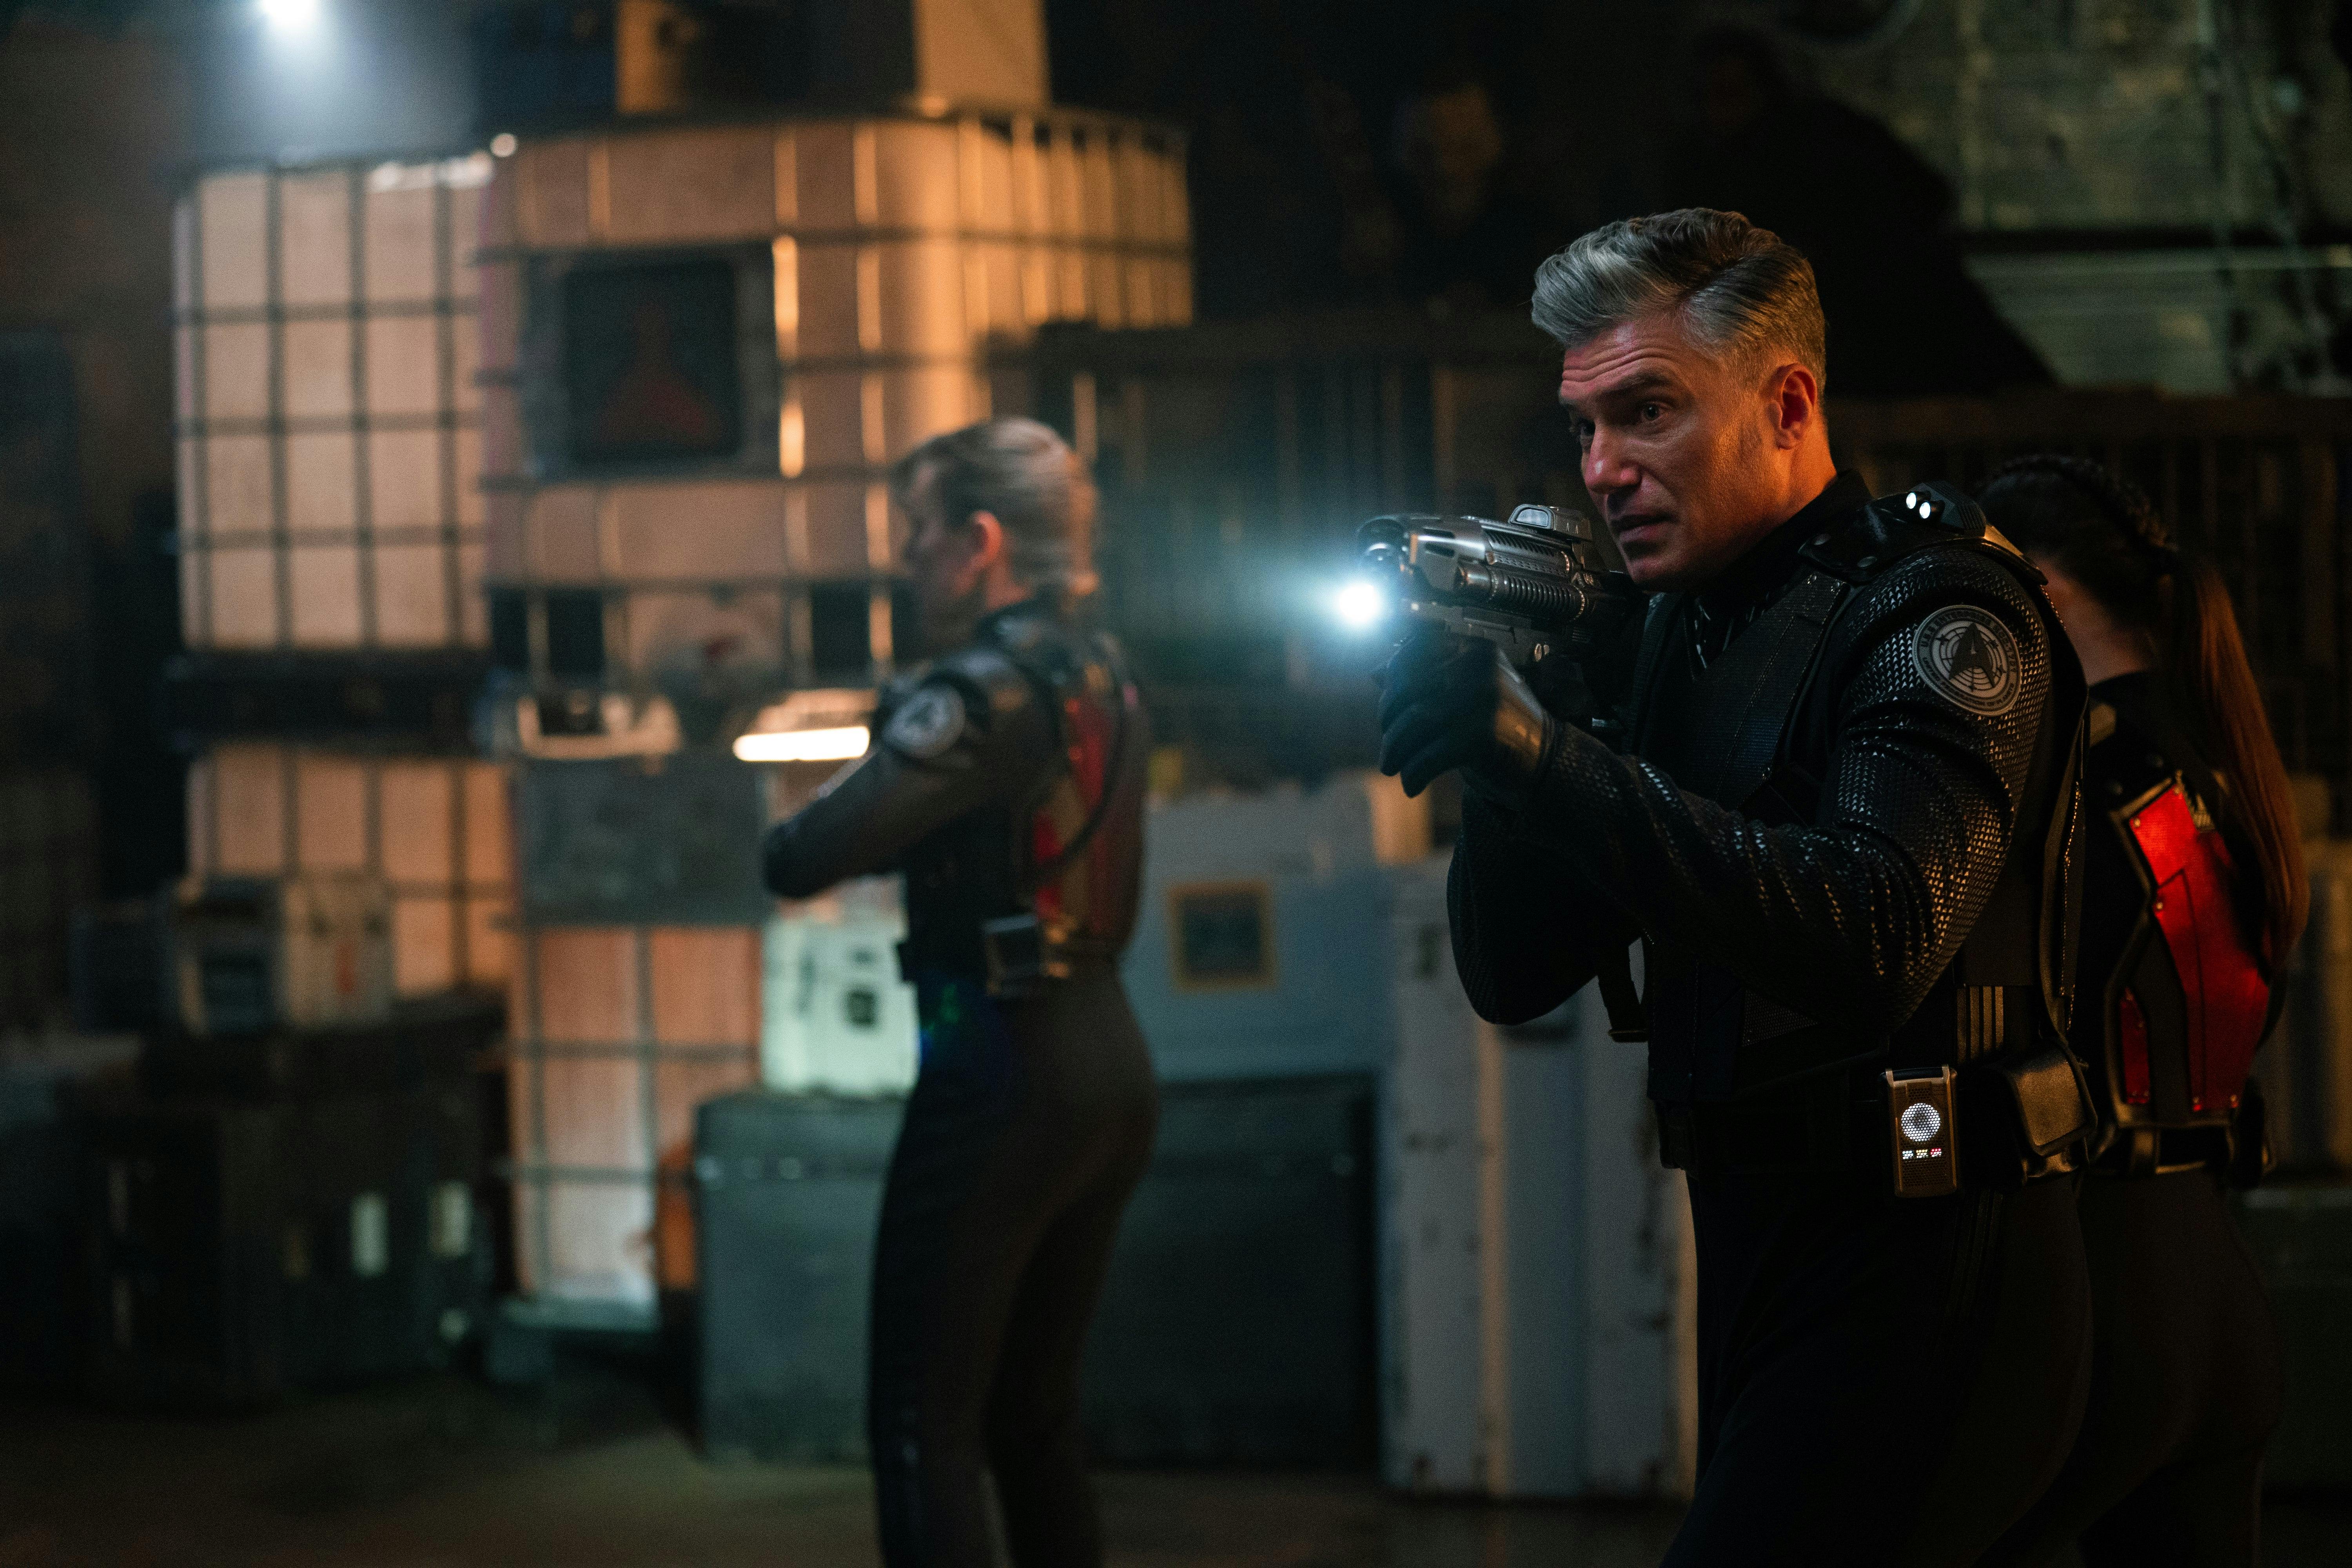 Pike (Anson Mount) is wearing tactical gear and holding a phaser rifle.